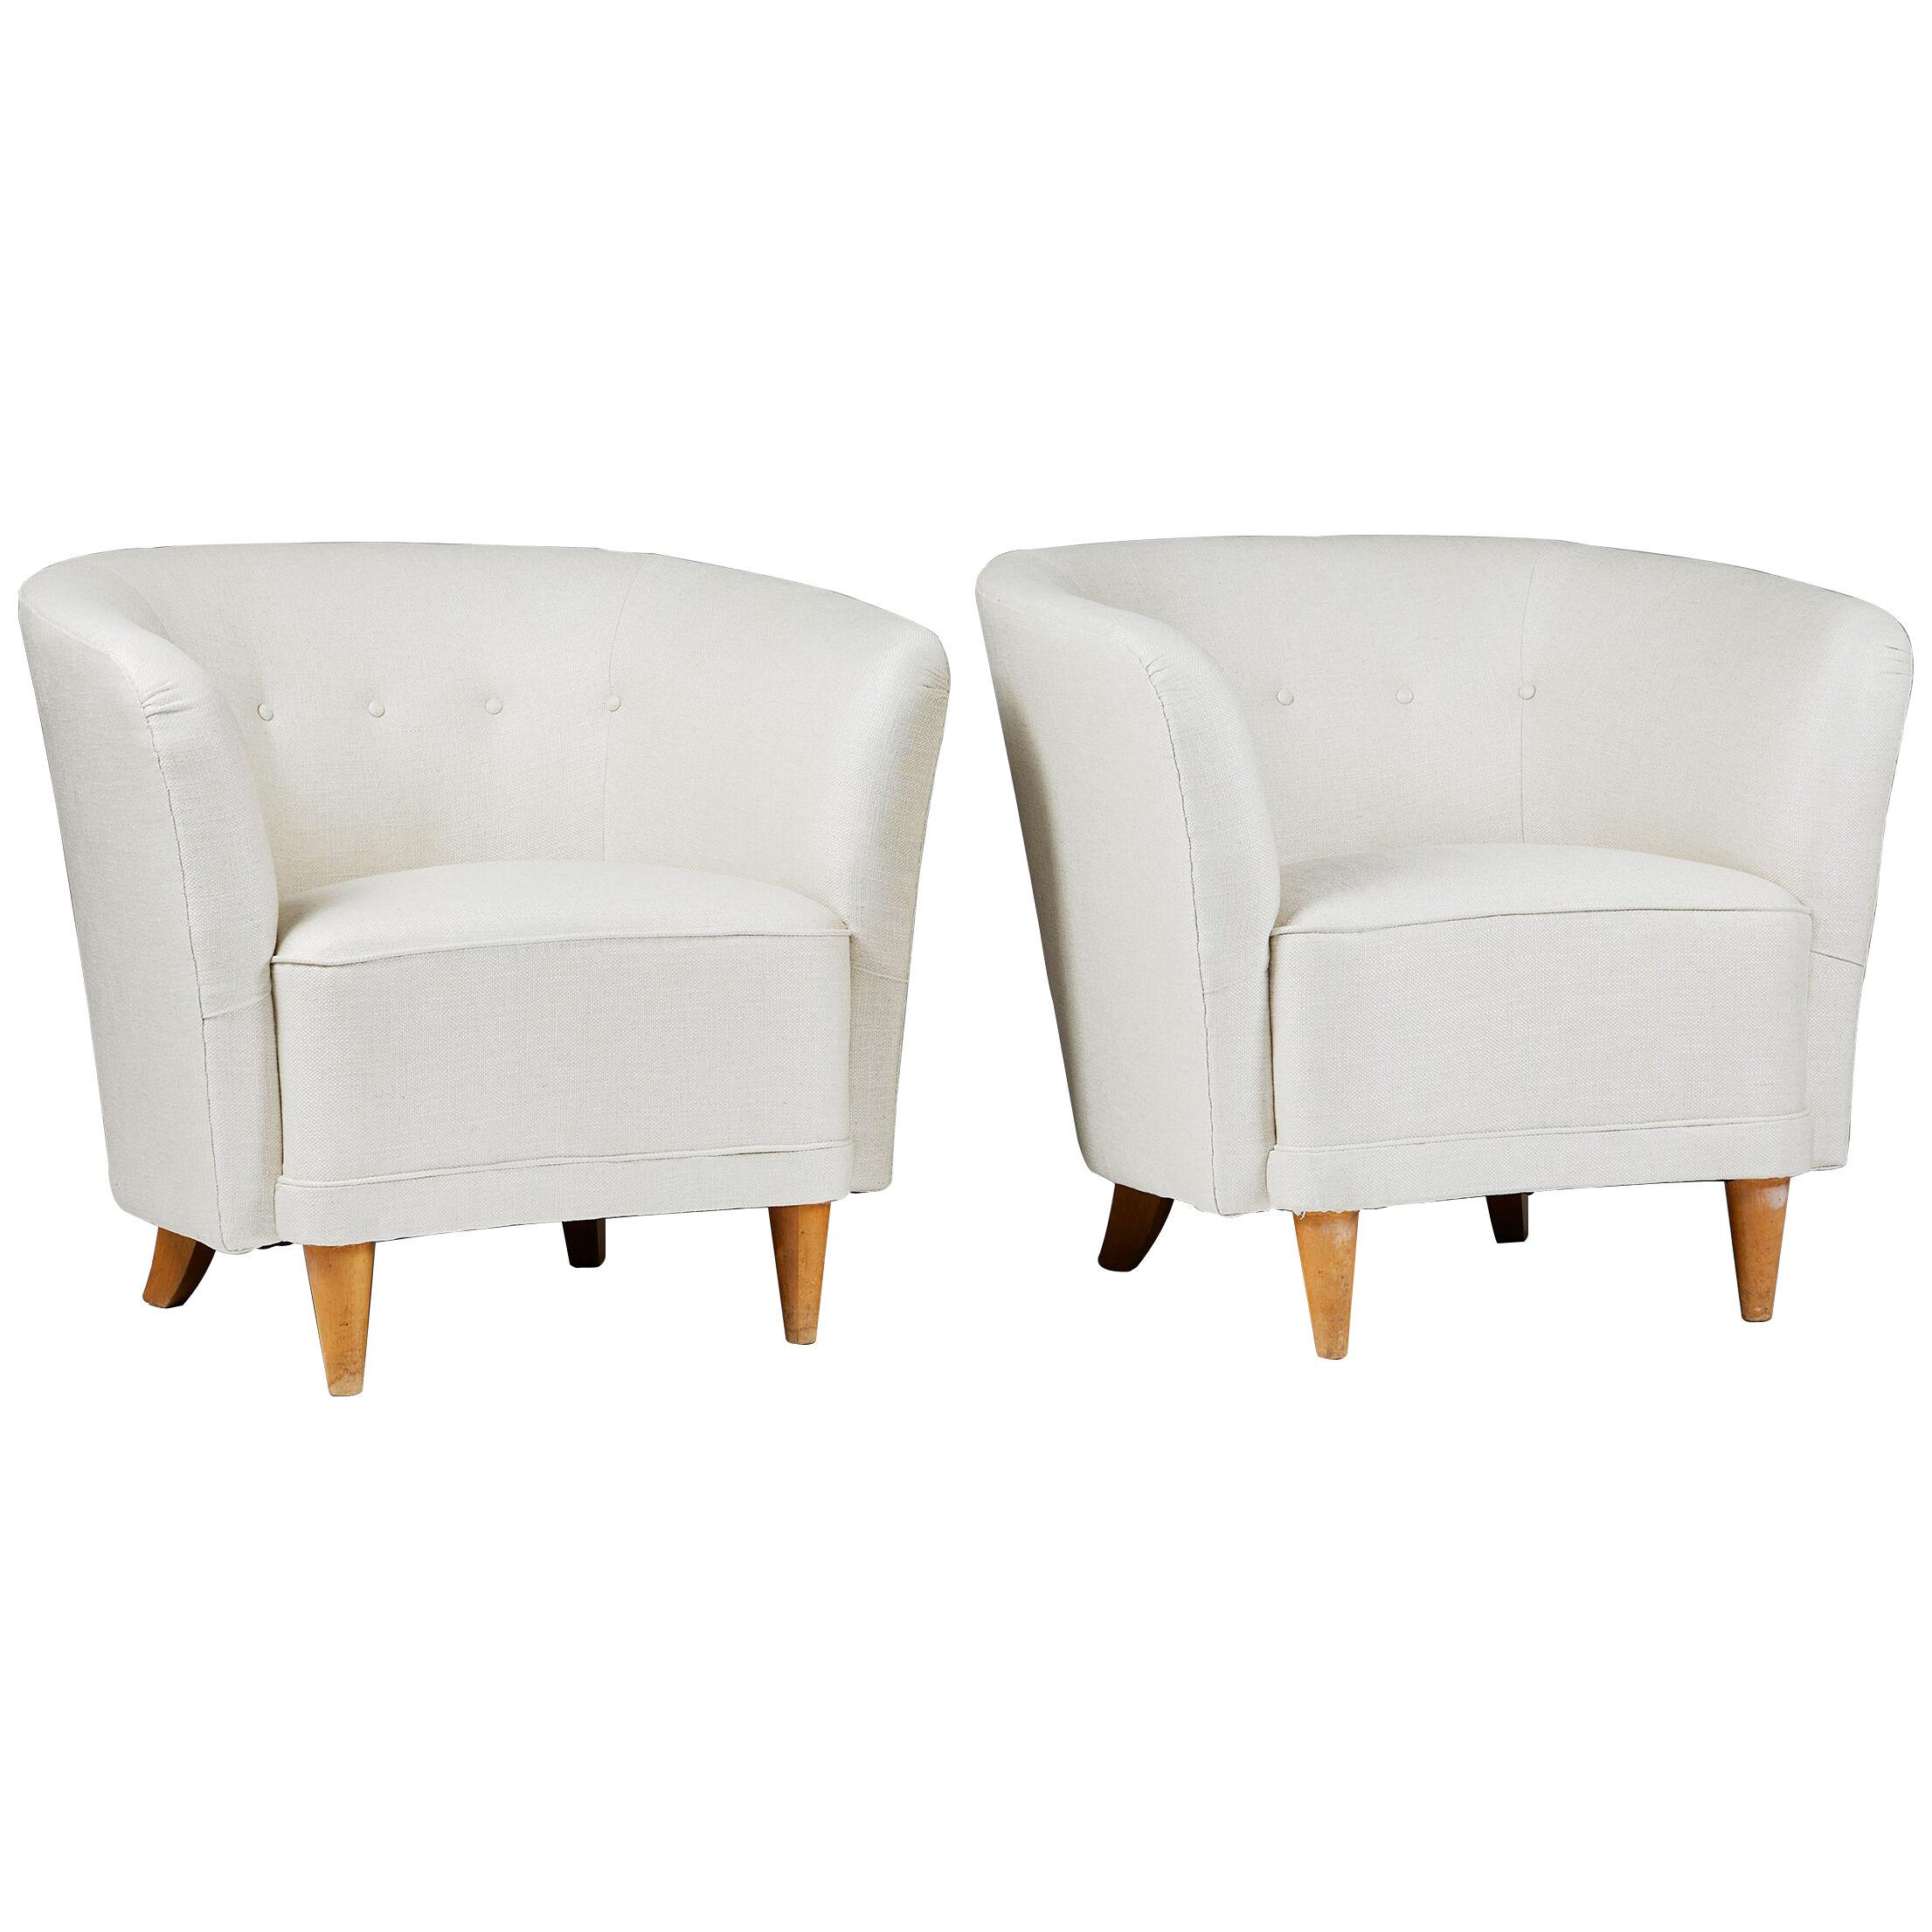 Pair of easy chairs attributed to Carl Johan Boman, Finland, 1950's.